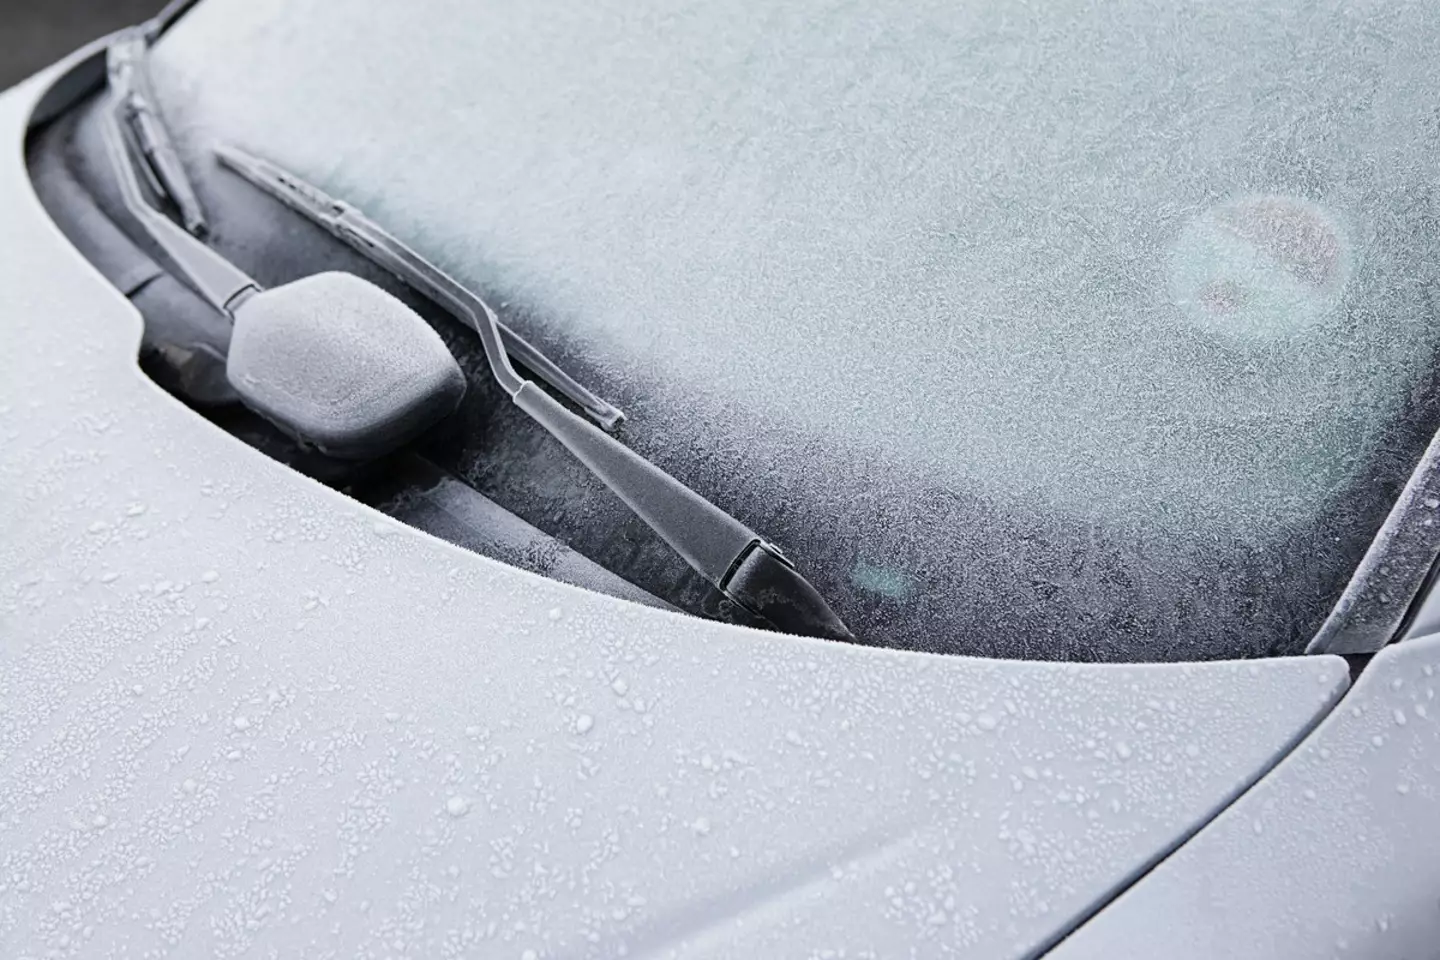 We're nearing icy car weather.